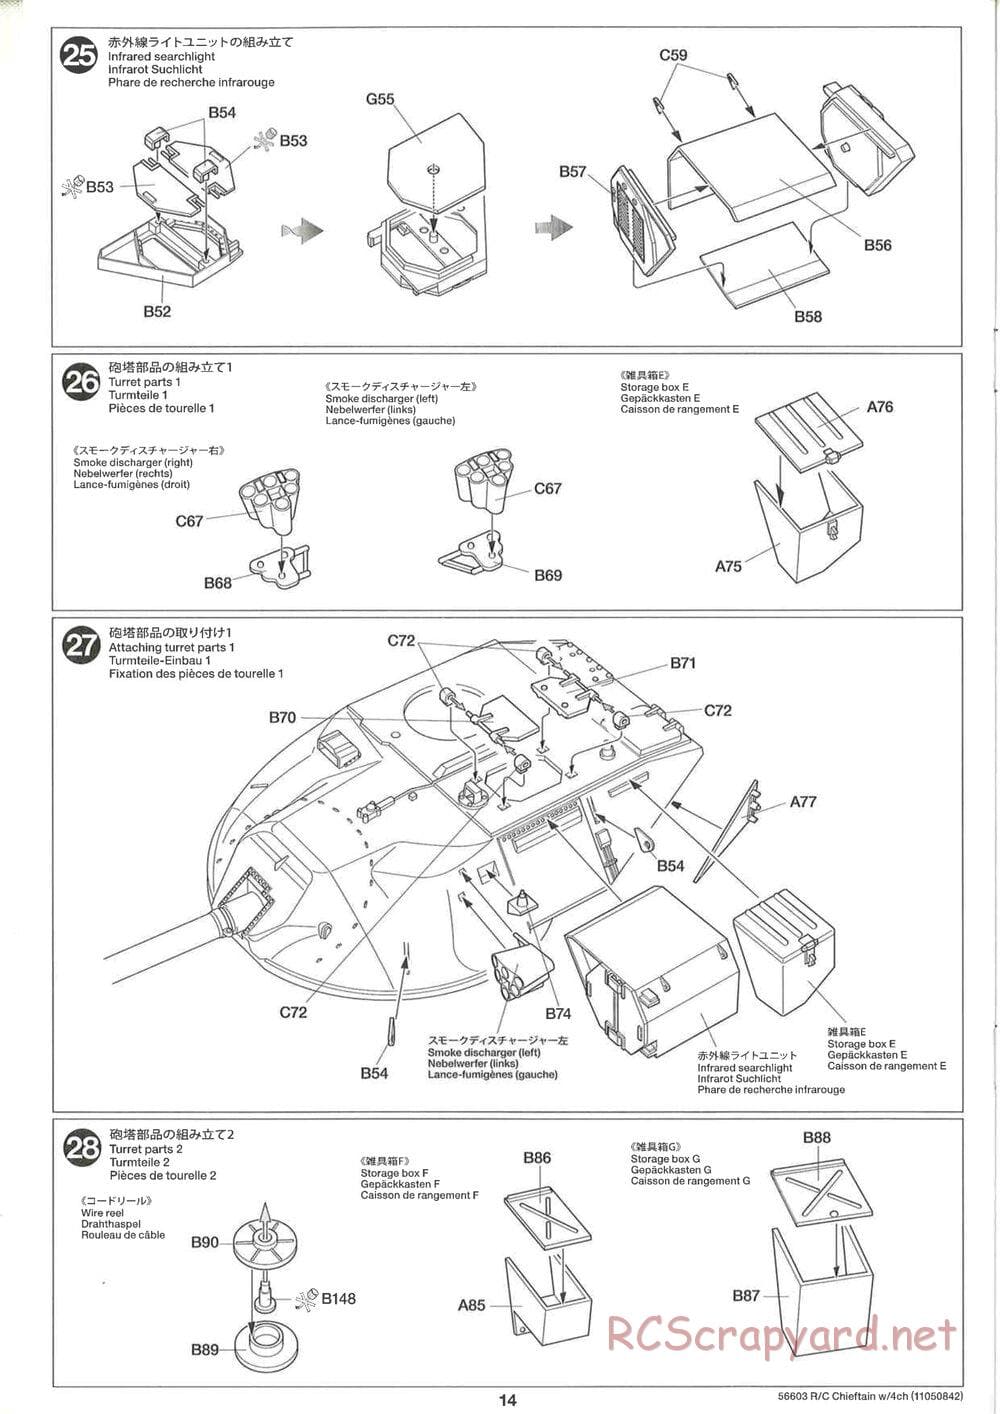 Tamiya - British Army Battle Tank Cheiftain - 1/25 Scale Chassis - Manual - Page 14